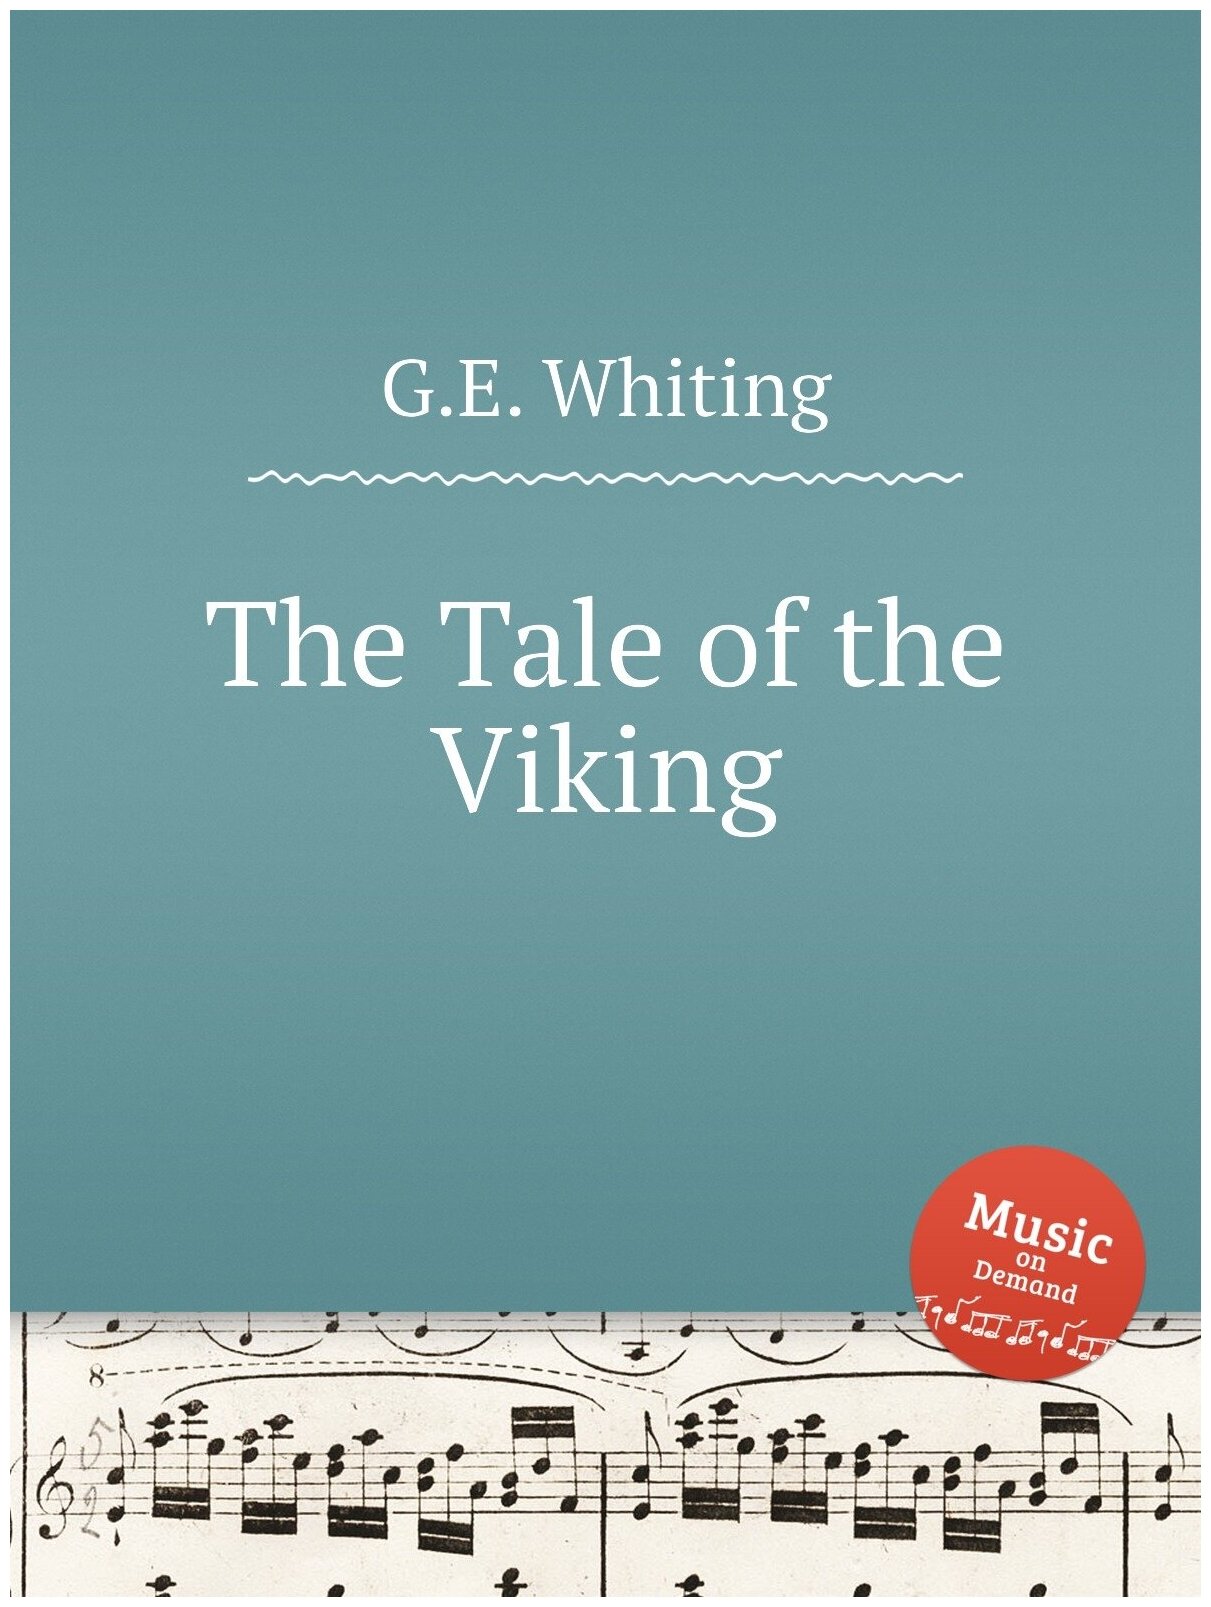 The Tale of the Viking